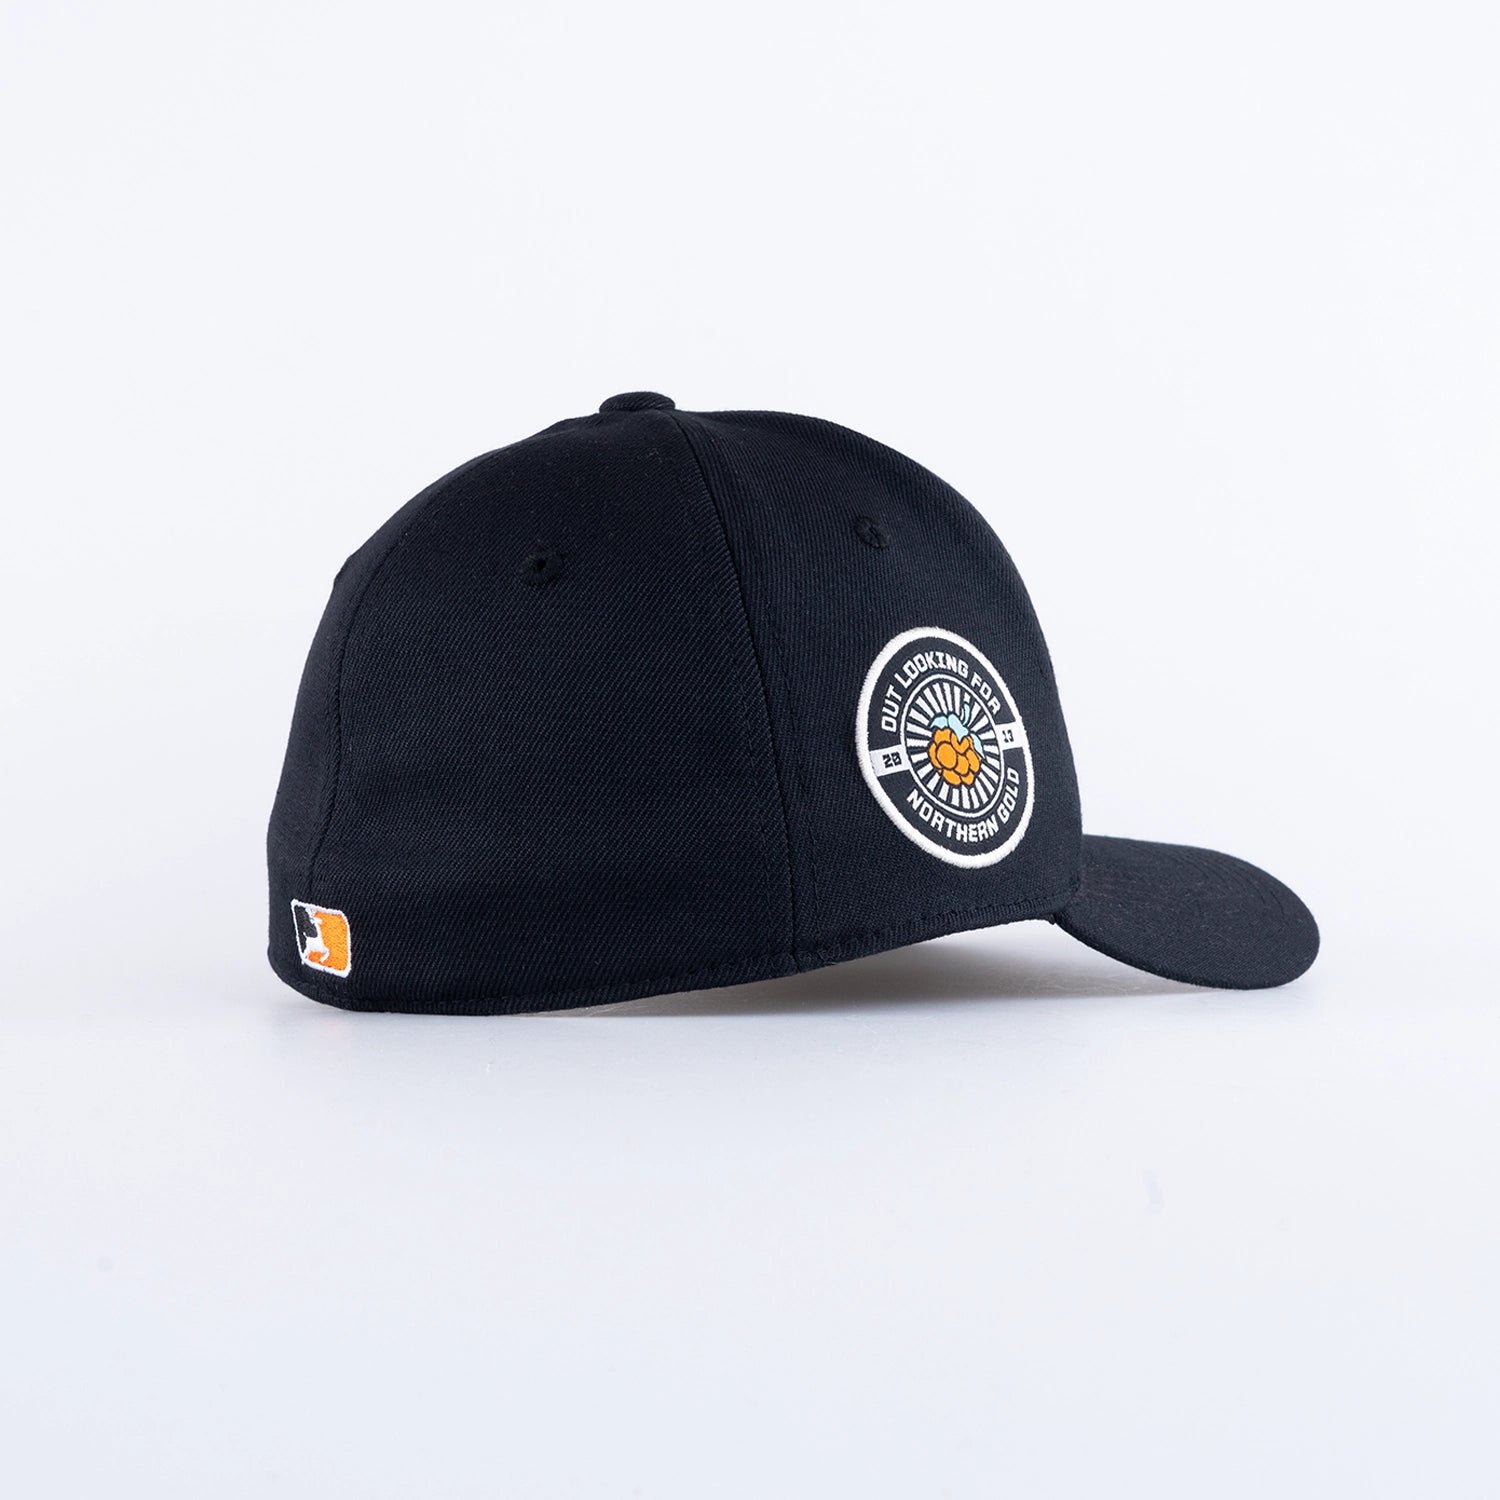 SYMBOL FITTED CAP - HOOKED BLACK